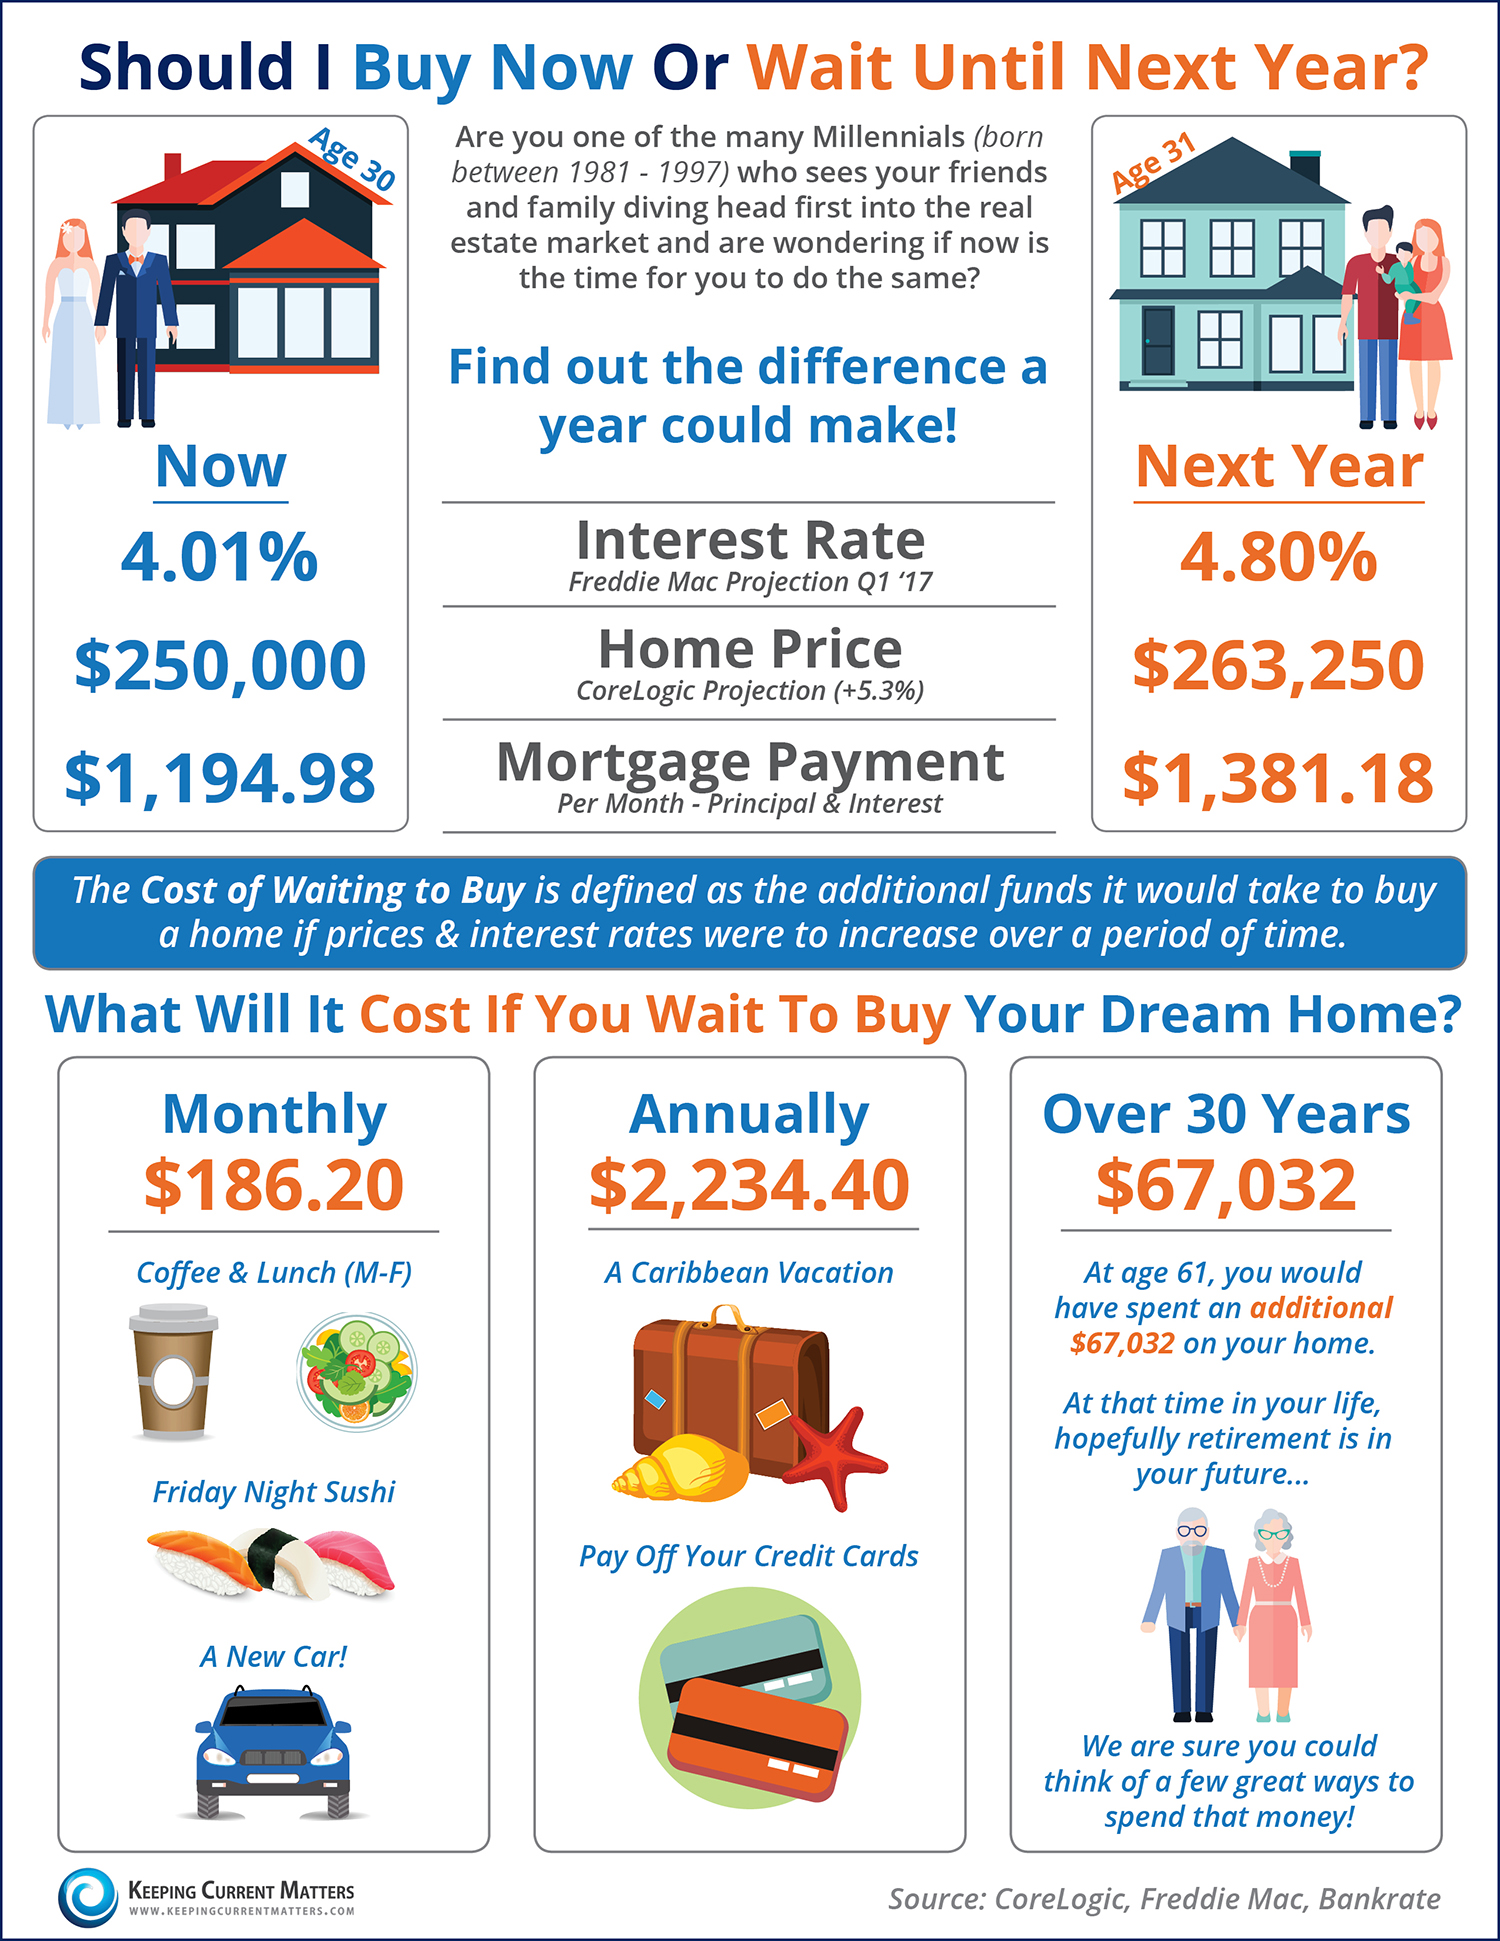 Should I Buy Now Or Wait Until Next Year? [INFOGRAPHIC] | Keeping Current Matters